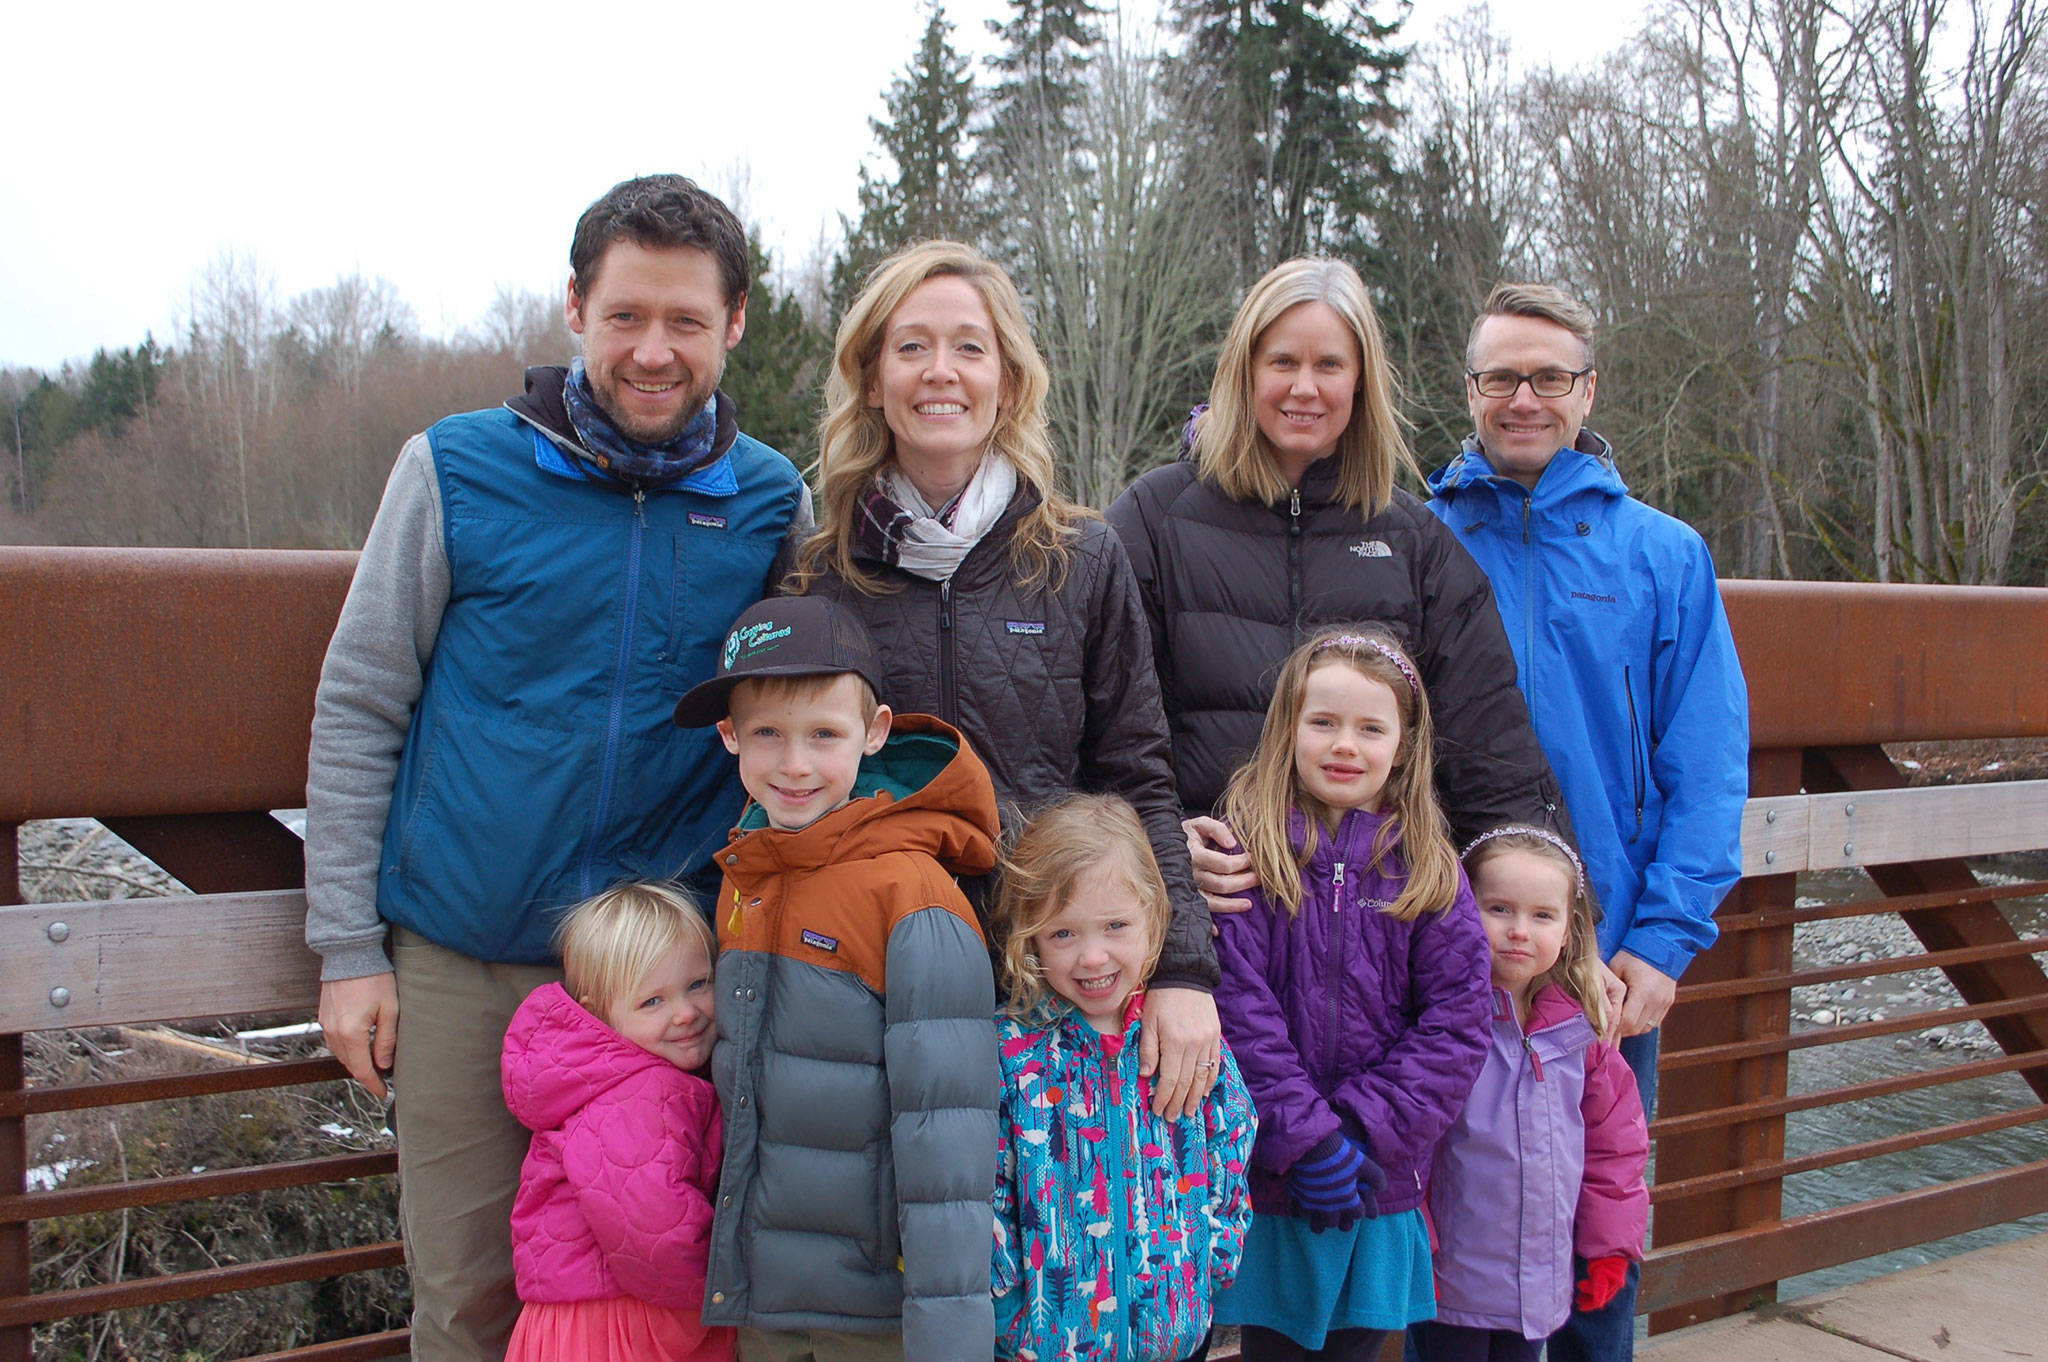 Two families own and operate Getting Cultured, a business in Sequim that ferments local foods and distributes its products across the Olympic Peninsula and in Tacoma. From back left, are co-owners AJ Wooten, Lindsey Wooten, Ginger Voyles, Greg Voyles, and front left, Ruby Wooten, Tyler Wooten, and Ava Wooten, Gwyneth Voyles and Gretchen Voyles. Sequim Gazette photo by Erin Hawkins